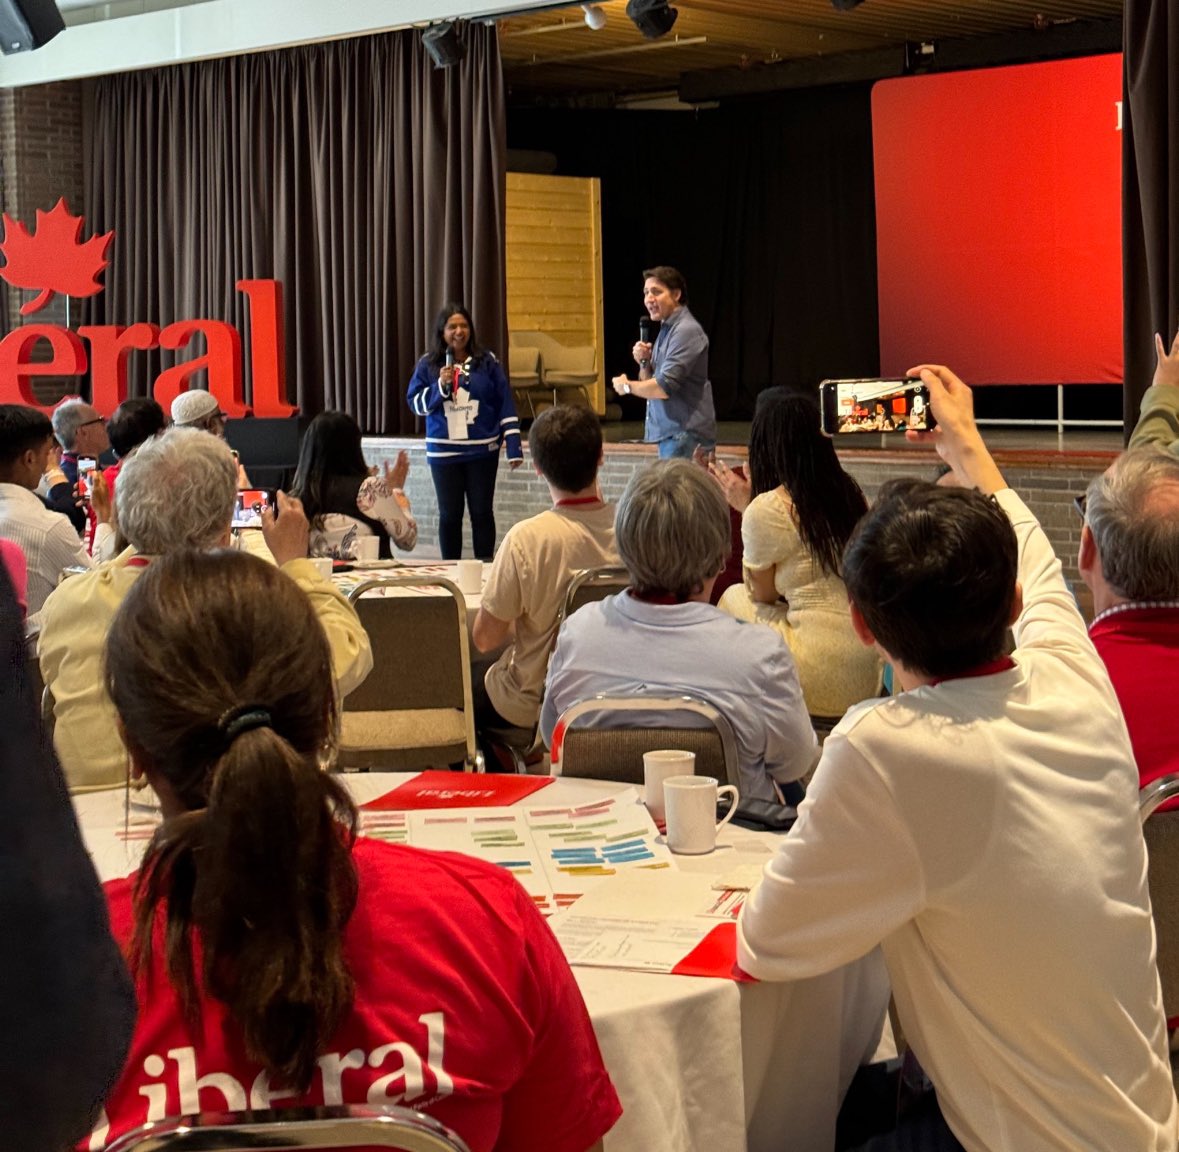 #TeamSidhu was excited to be at the campaign college in Toronto with so many engaged volunteers alongside @JustinTrudeau ! Thank you to all of the incredible volunteers for making the event a big success. #BramptonEast